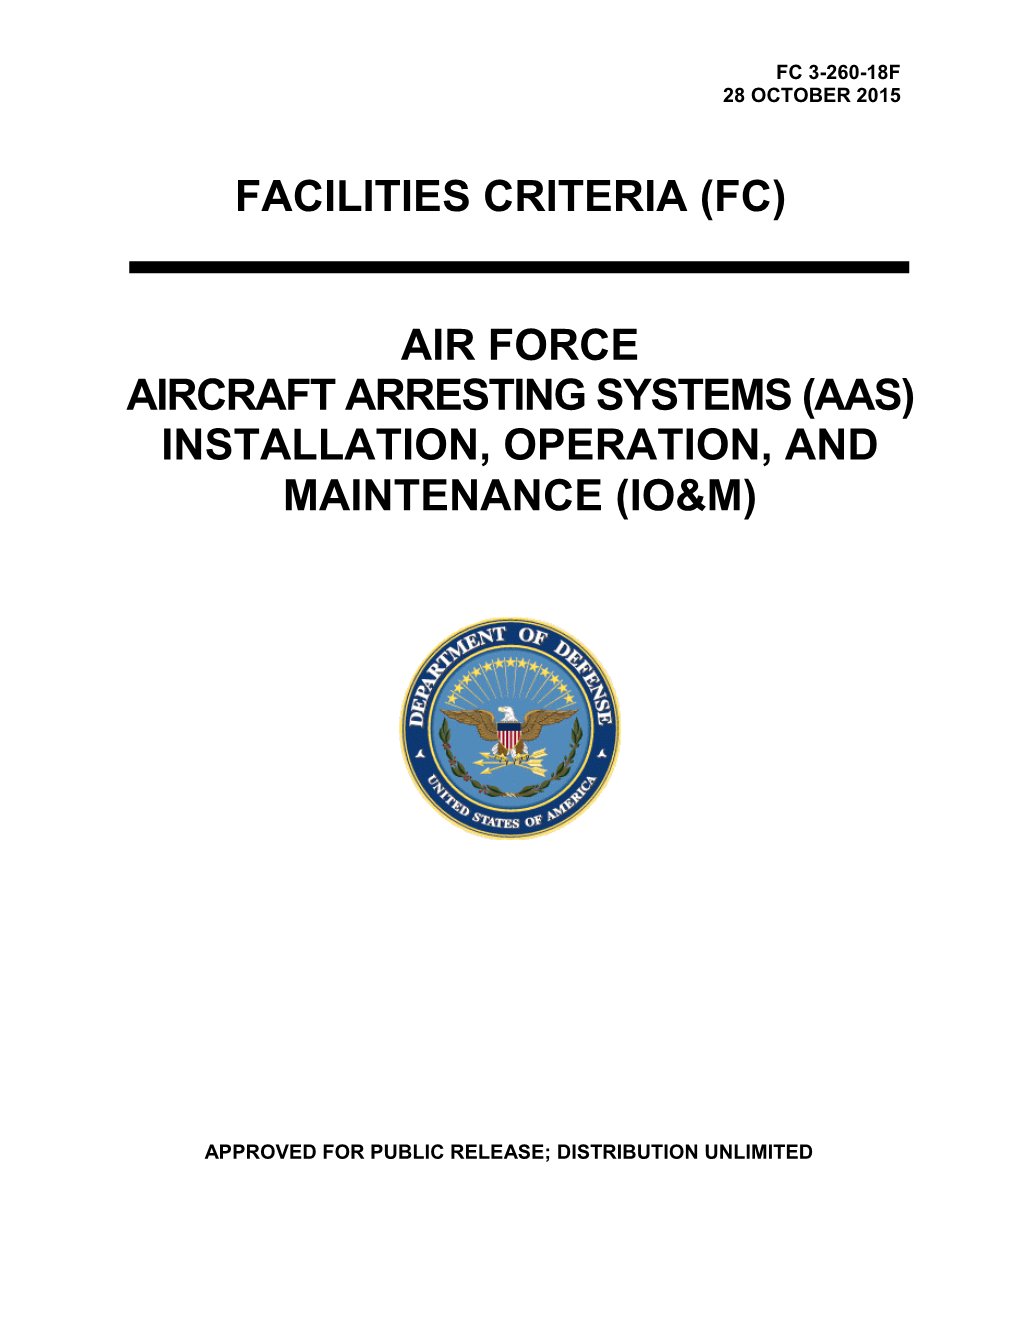 FC 3 260 18F Air Force Aircraft Arresting Systems (AAS)